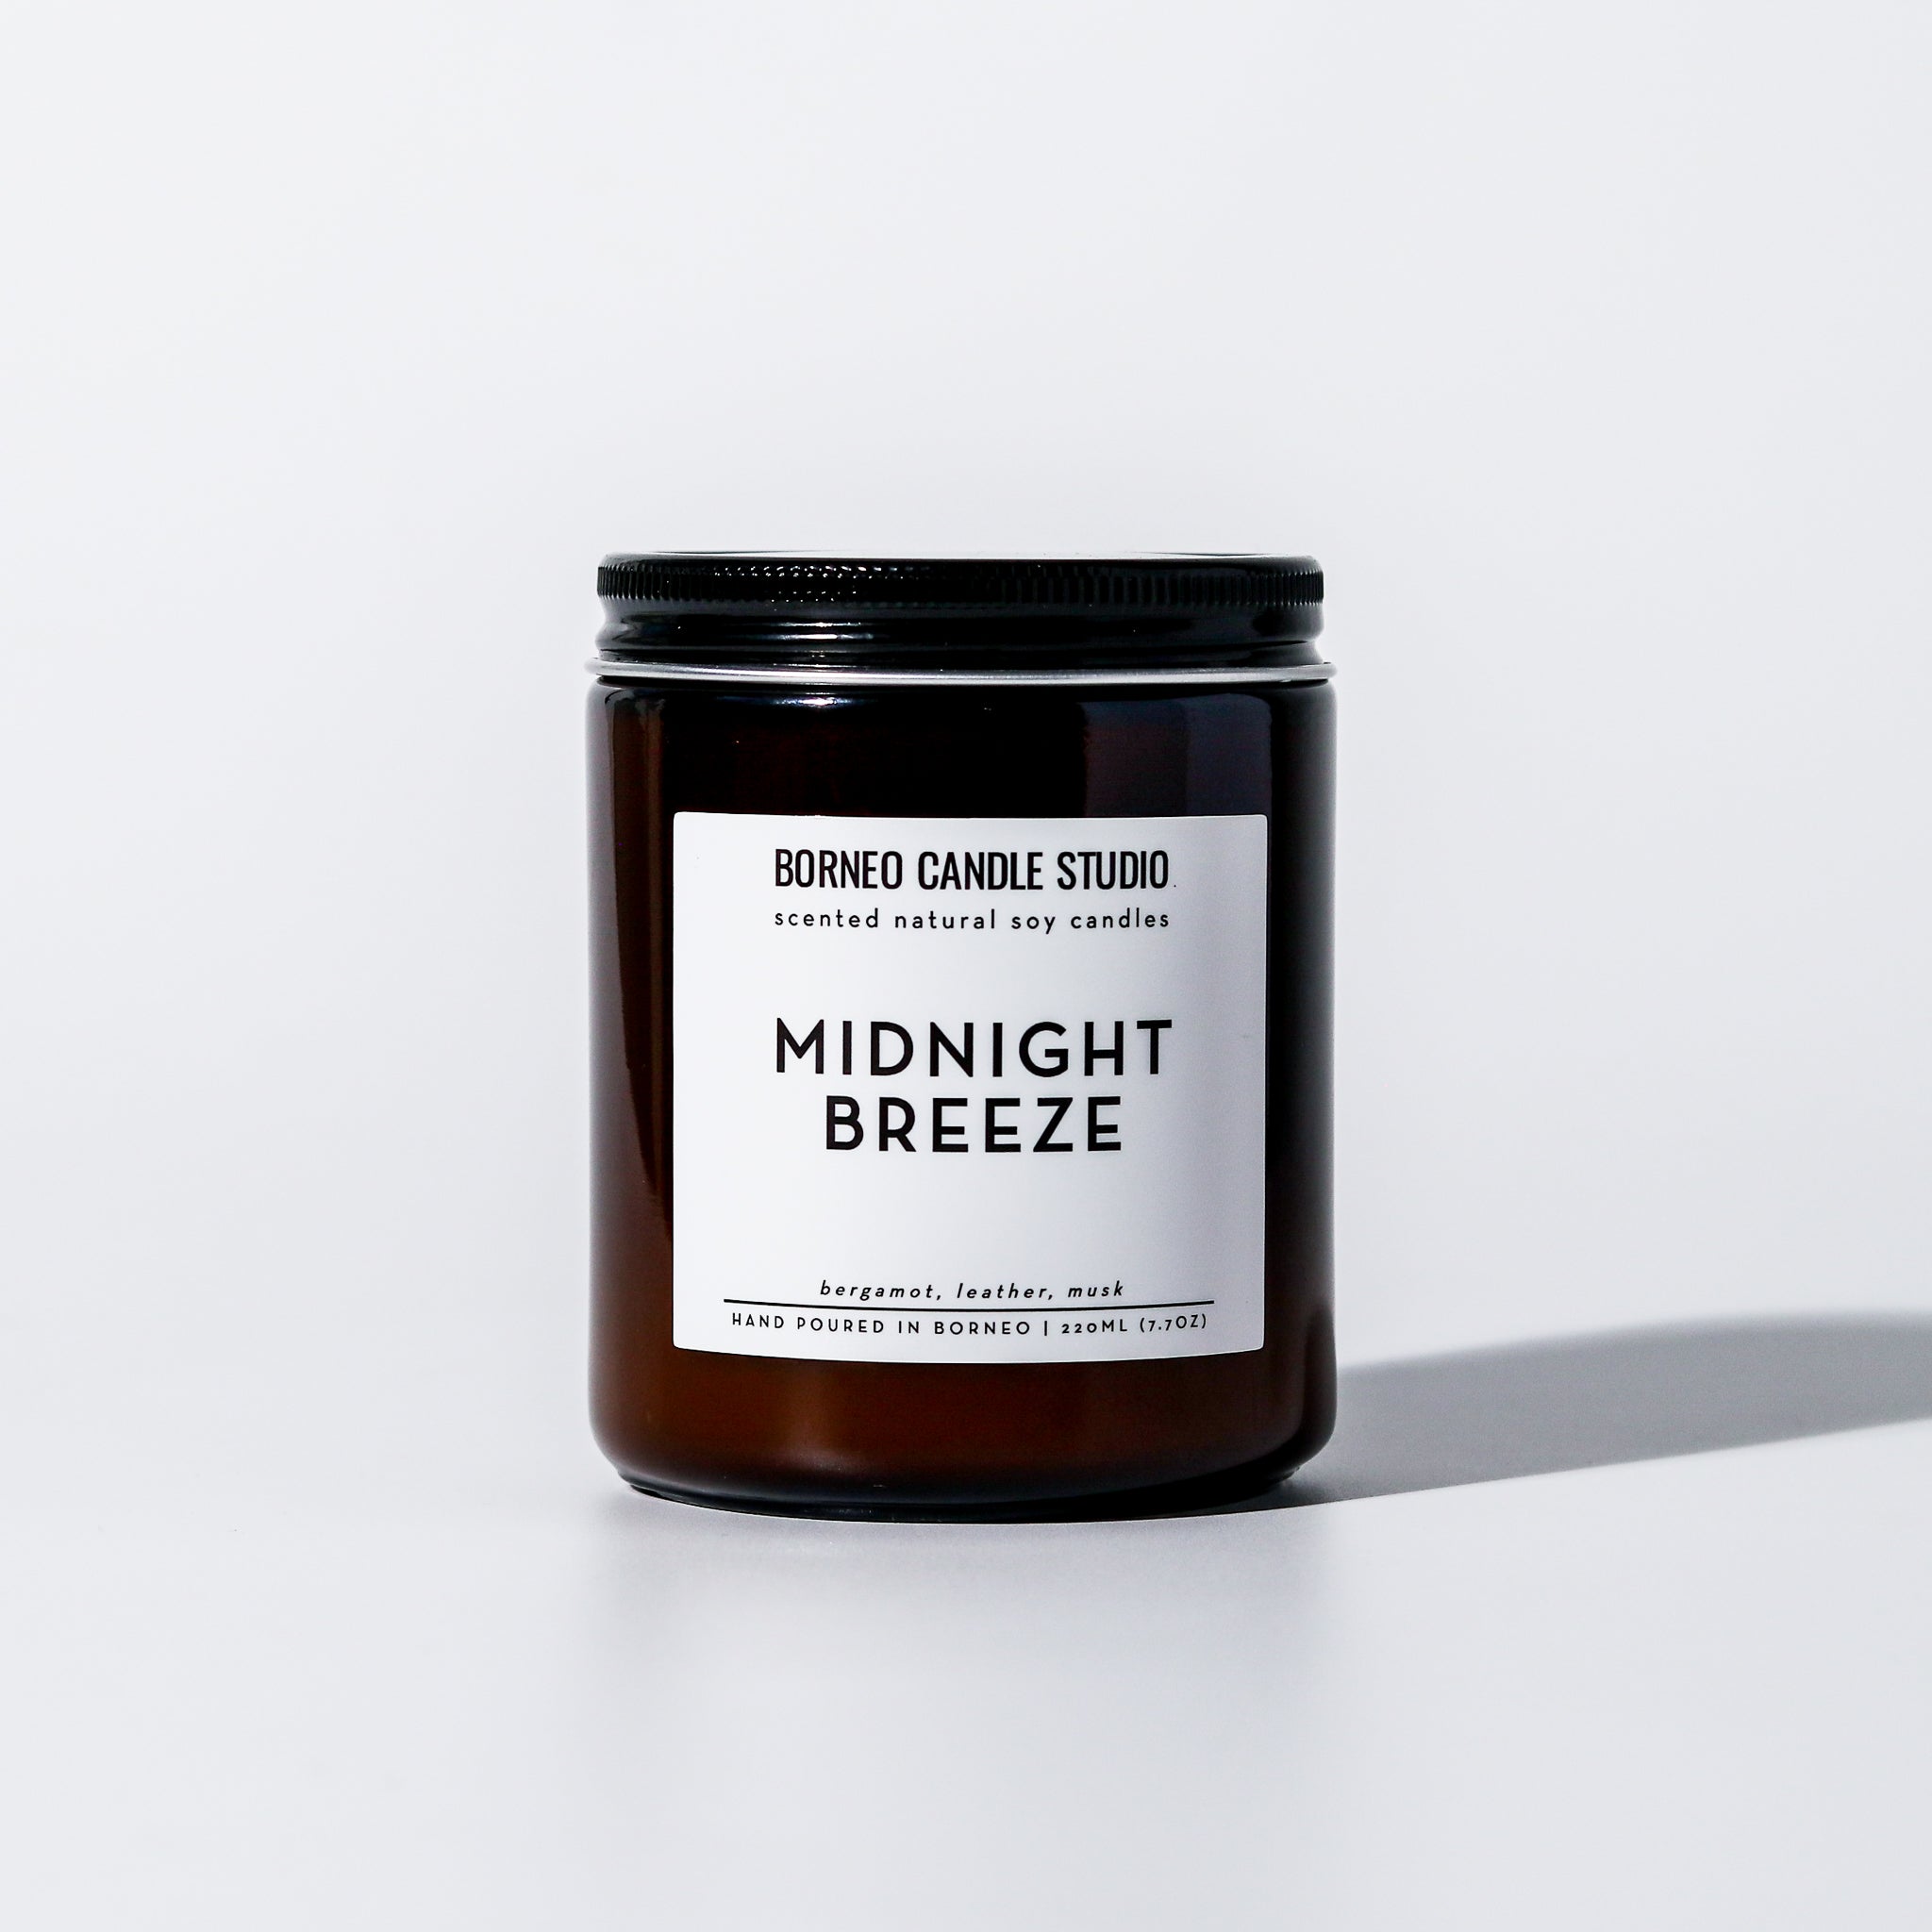 Midnight Breeze Soy Candle - Borneo Candle Studio